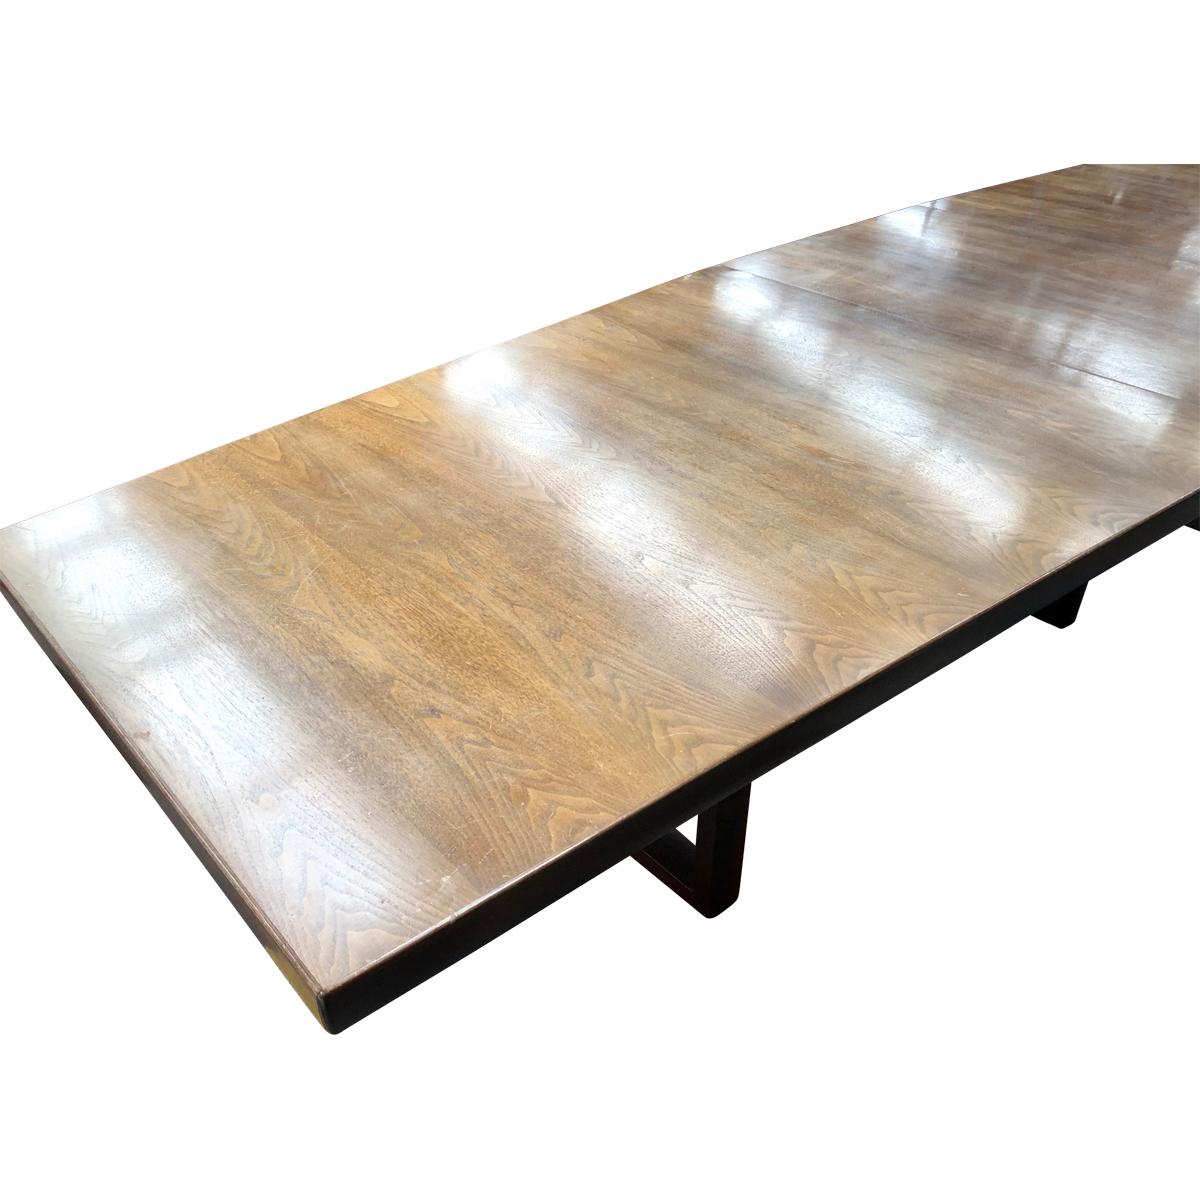 Mid-20th Century Large Scandinavian Conference or Dining Table, circa 1960